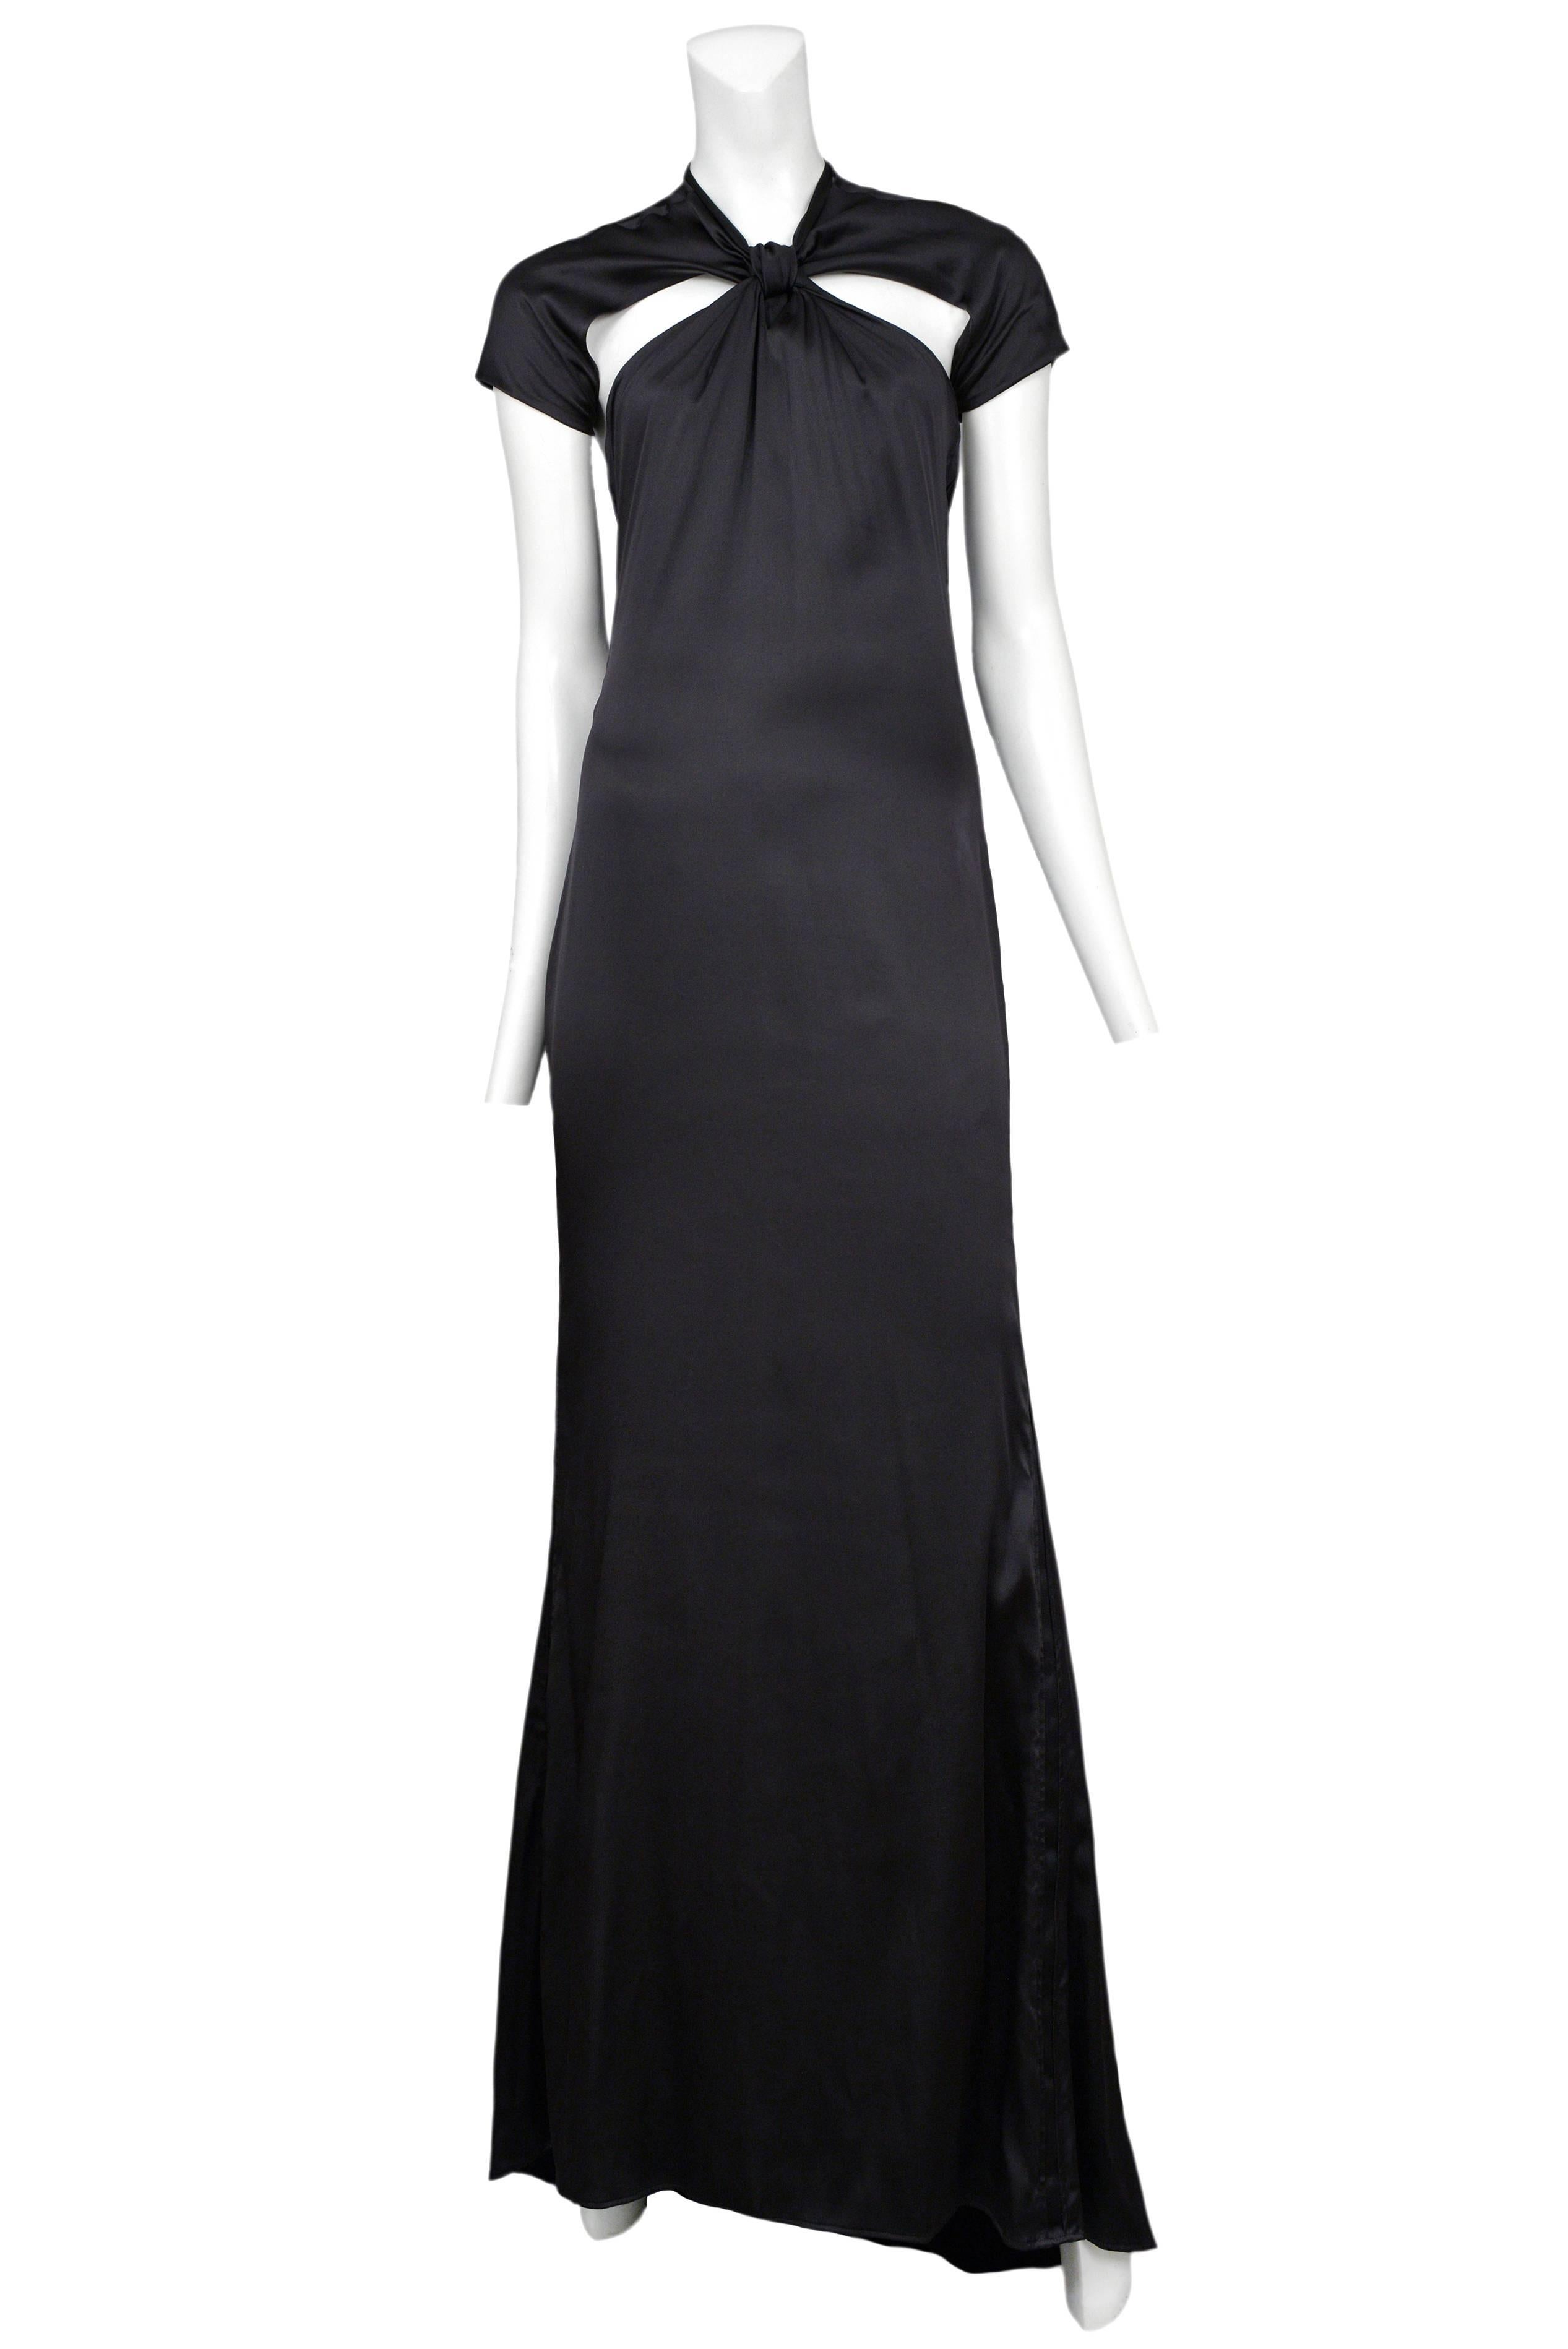 Vintage Tom Ford for Gucci black satin gown featuring cap sleeves, a knot at the collar connecting the bust and sleeves and an open back.
Please inquire for additional images.